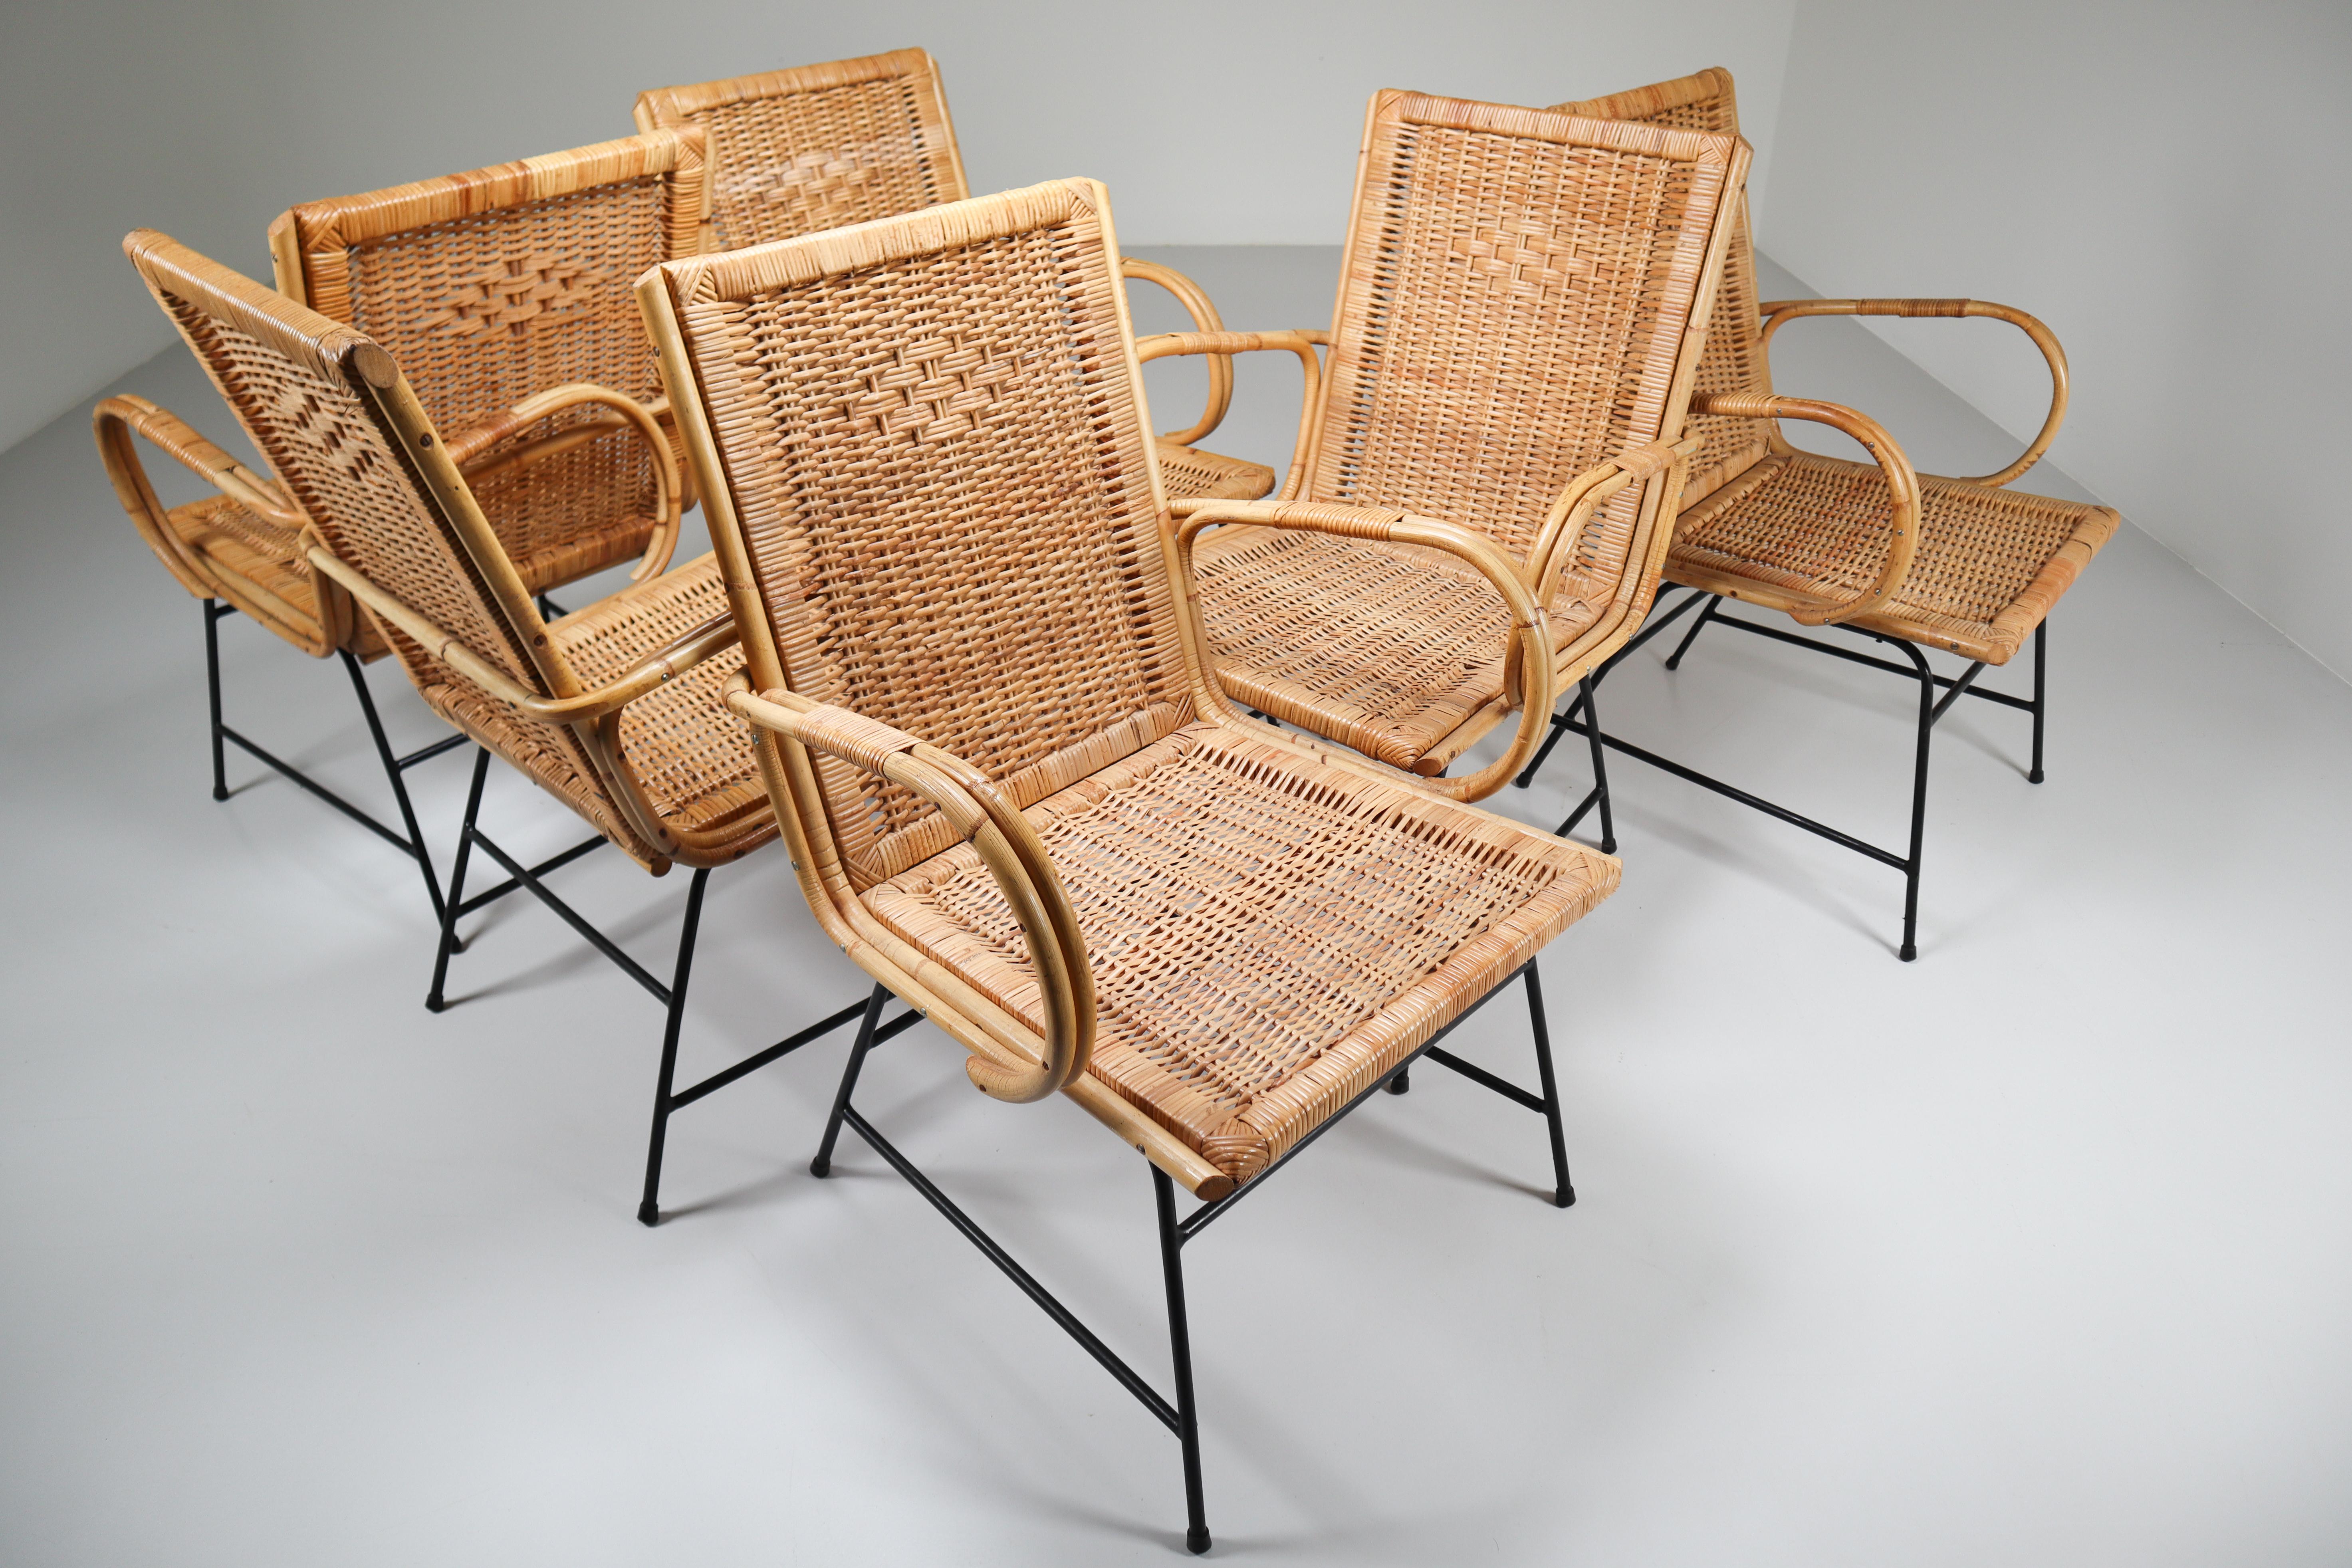 20th Century Wicker Midcentury Armchair Designed and Produced in France, 1960s